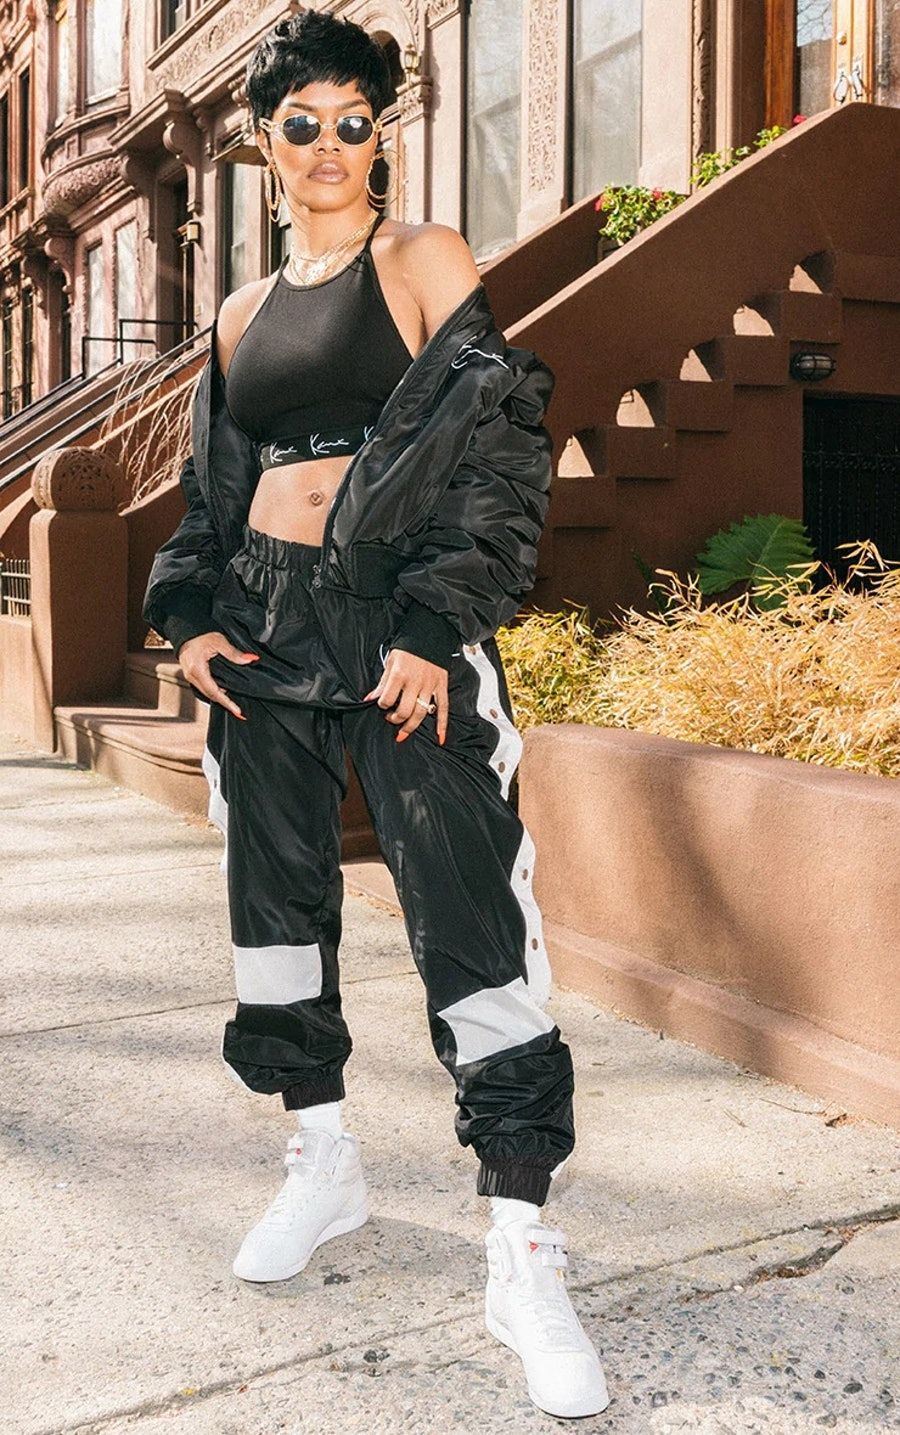 The PrettyLittleThing x Karl Kani Clothing Line Is Going To Bring '90s Hip-Hop Back Into Your Closet - The PrettyLittleThing x Karl Kani Clothing Line Is Going To Bring '90s Hip-Hop Back Into Your Closet -   13 hip style Hipster ideas